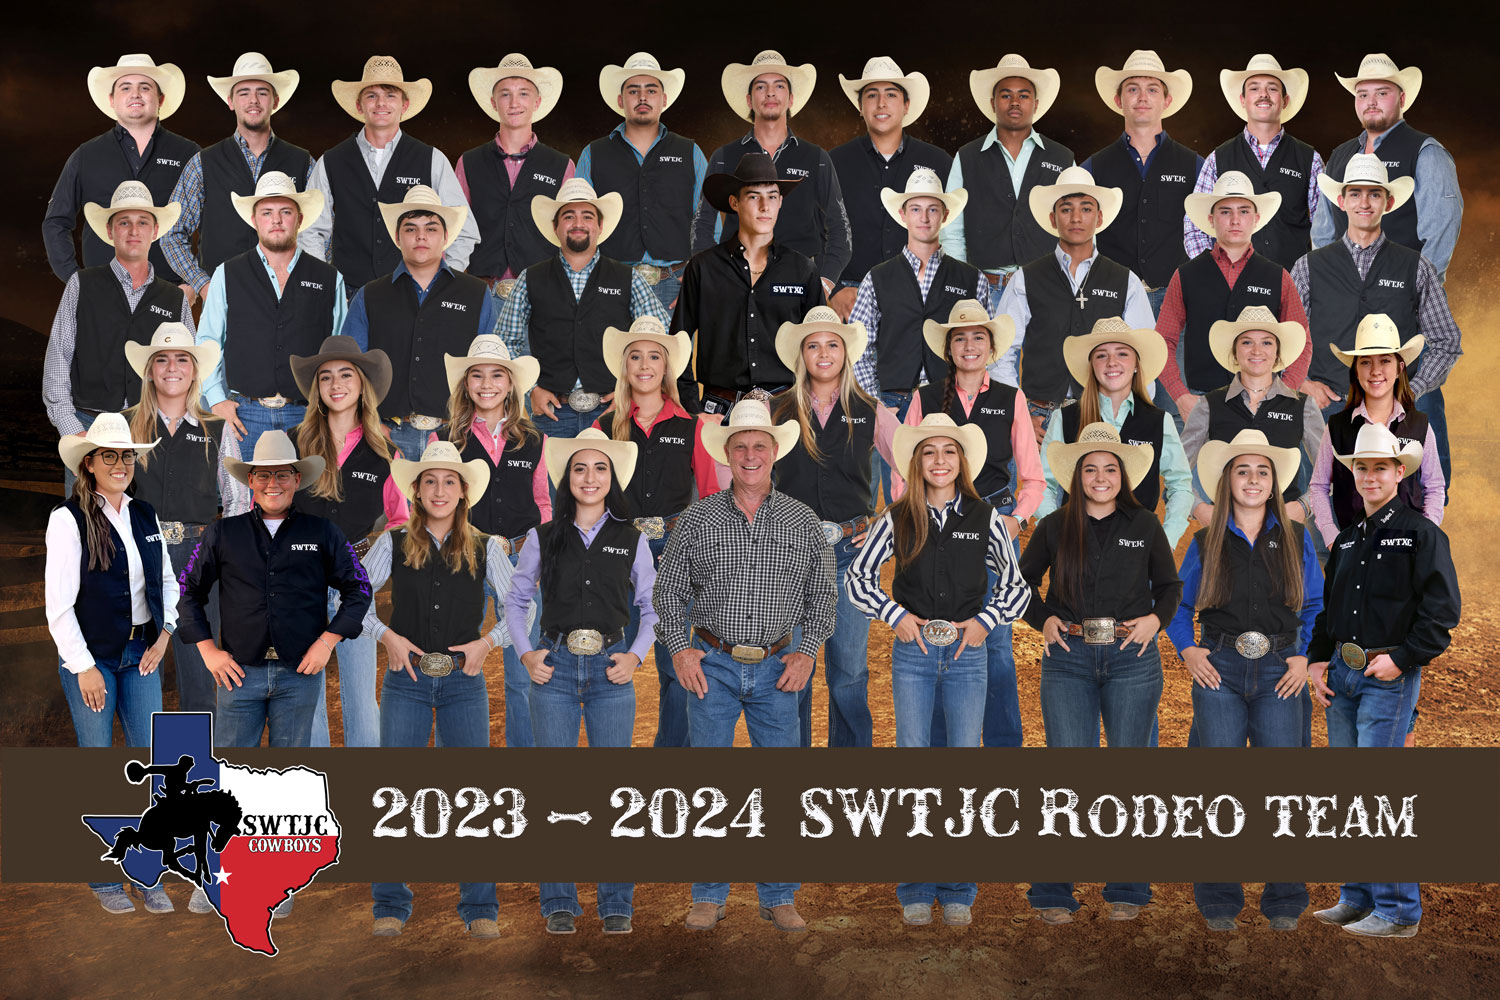 2023 - 2024 SWTJC Rodeo Team